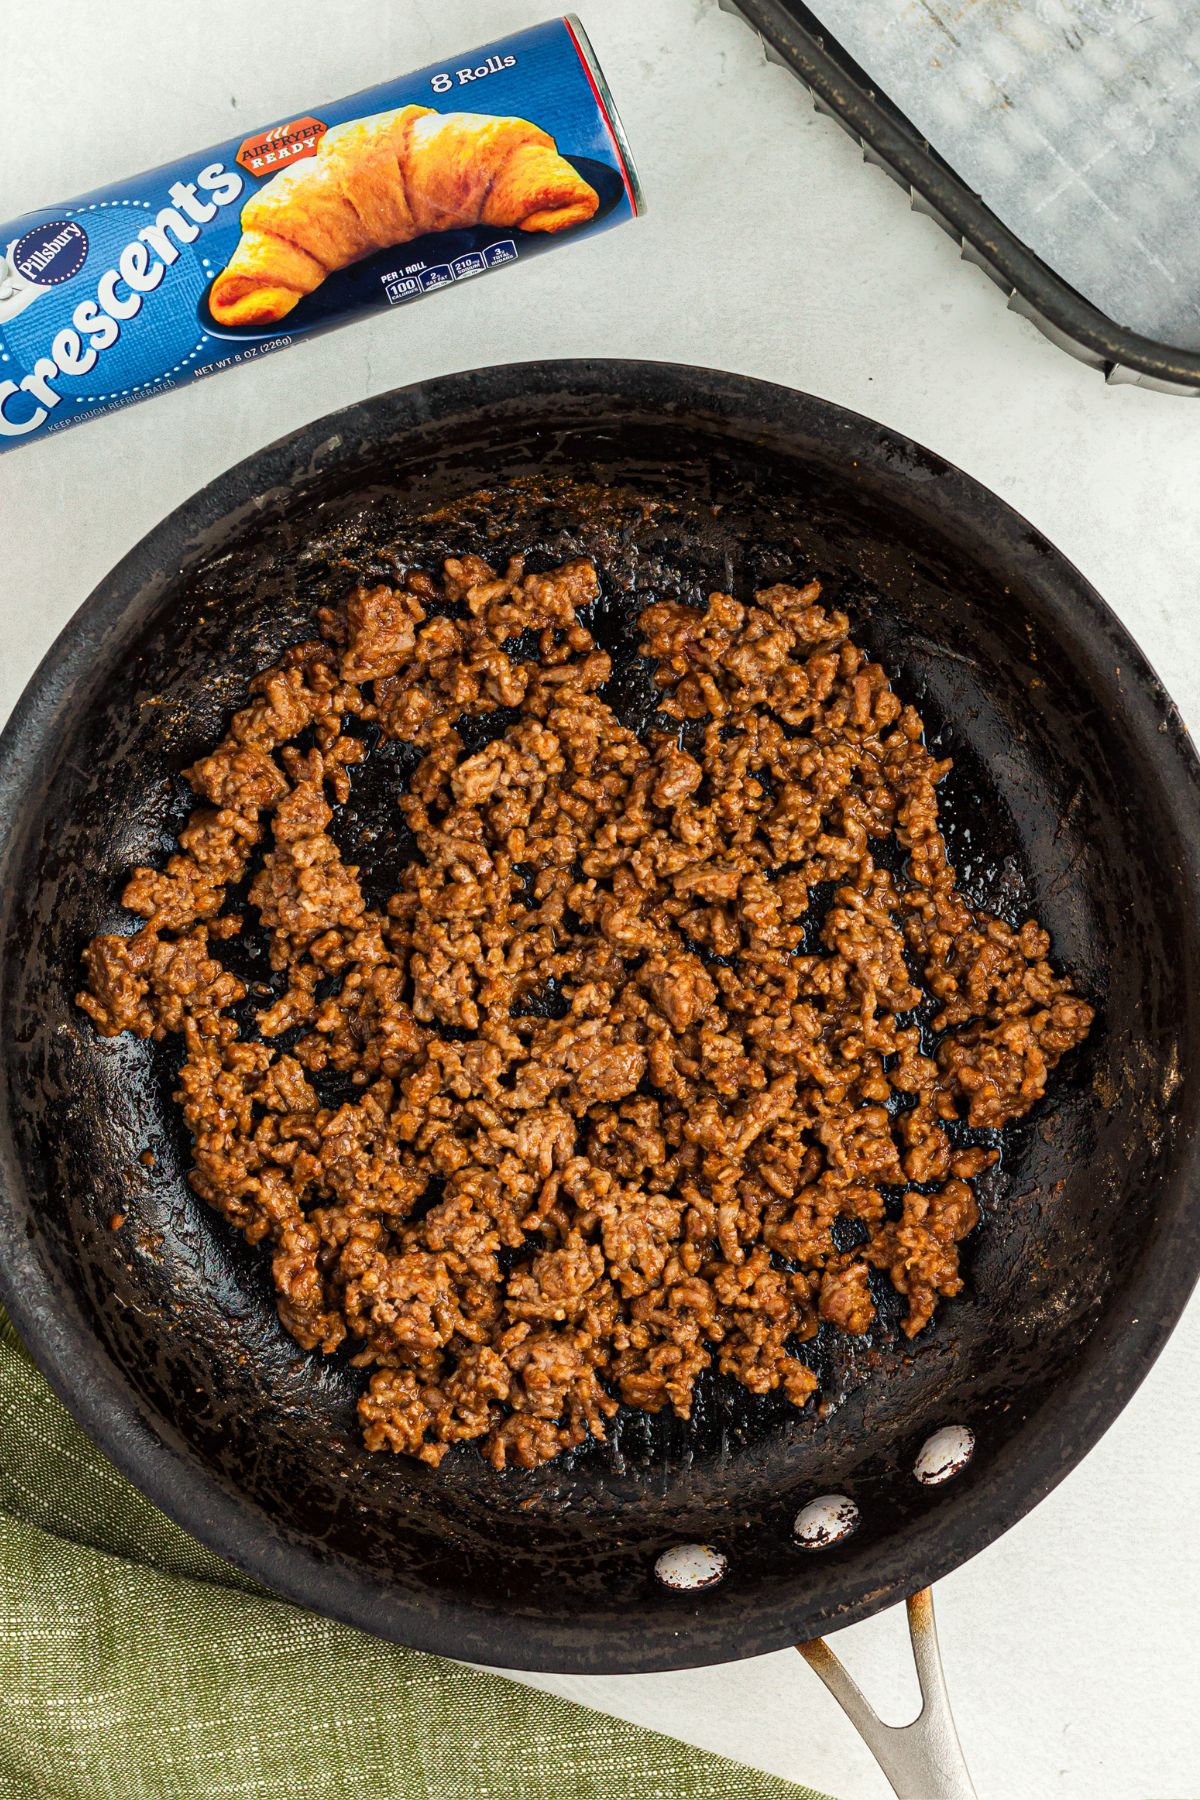 Cooked and seasoned taco meat in a skillet after being cooked